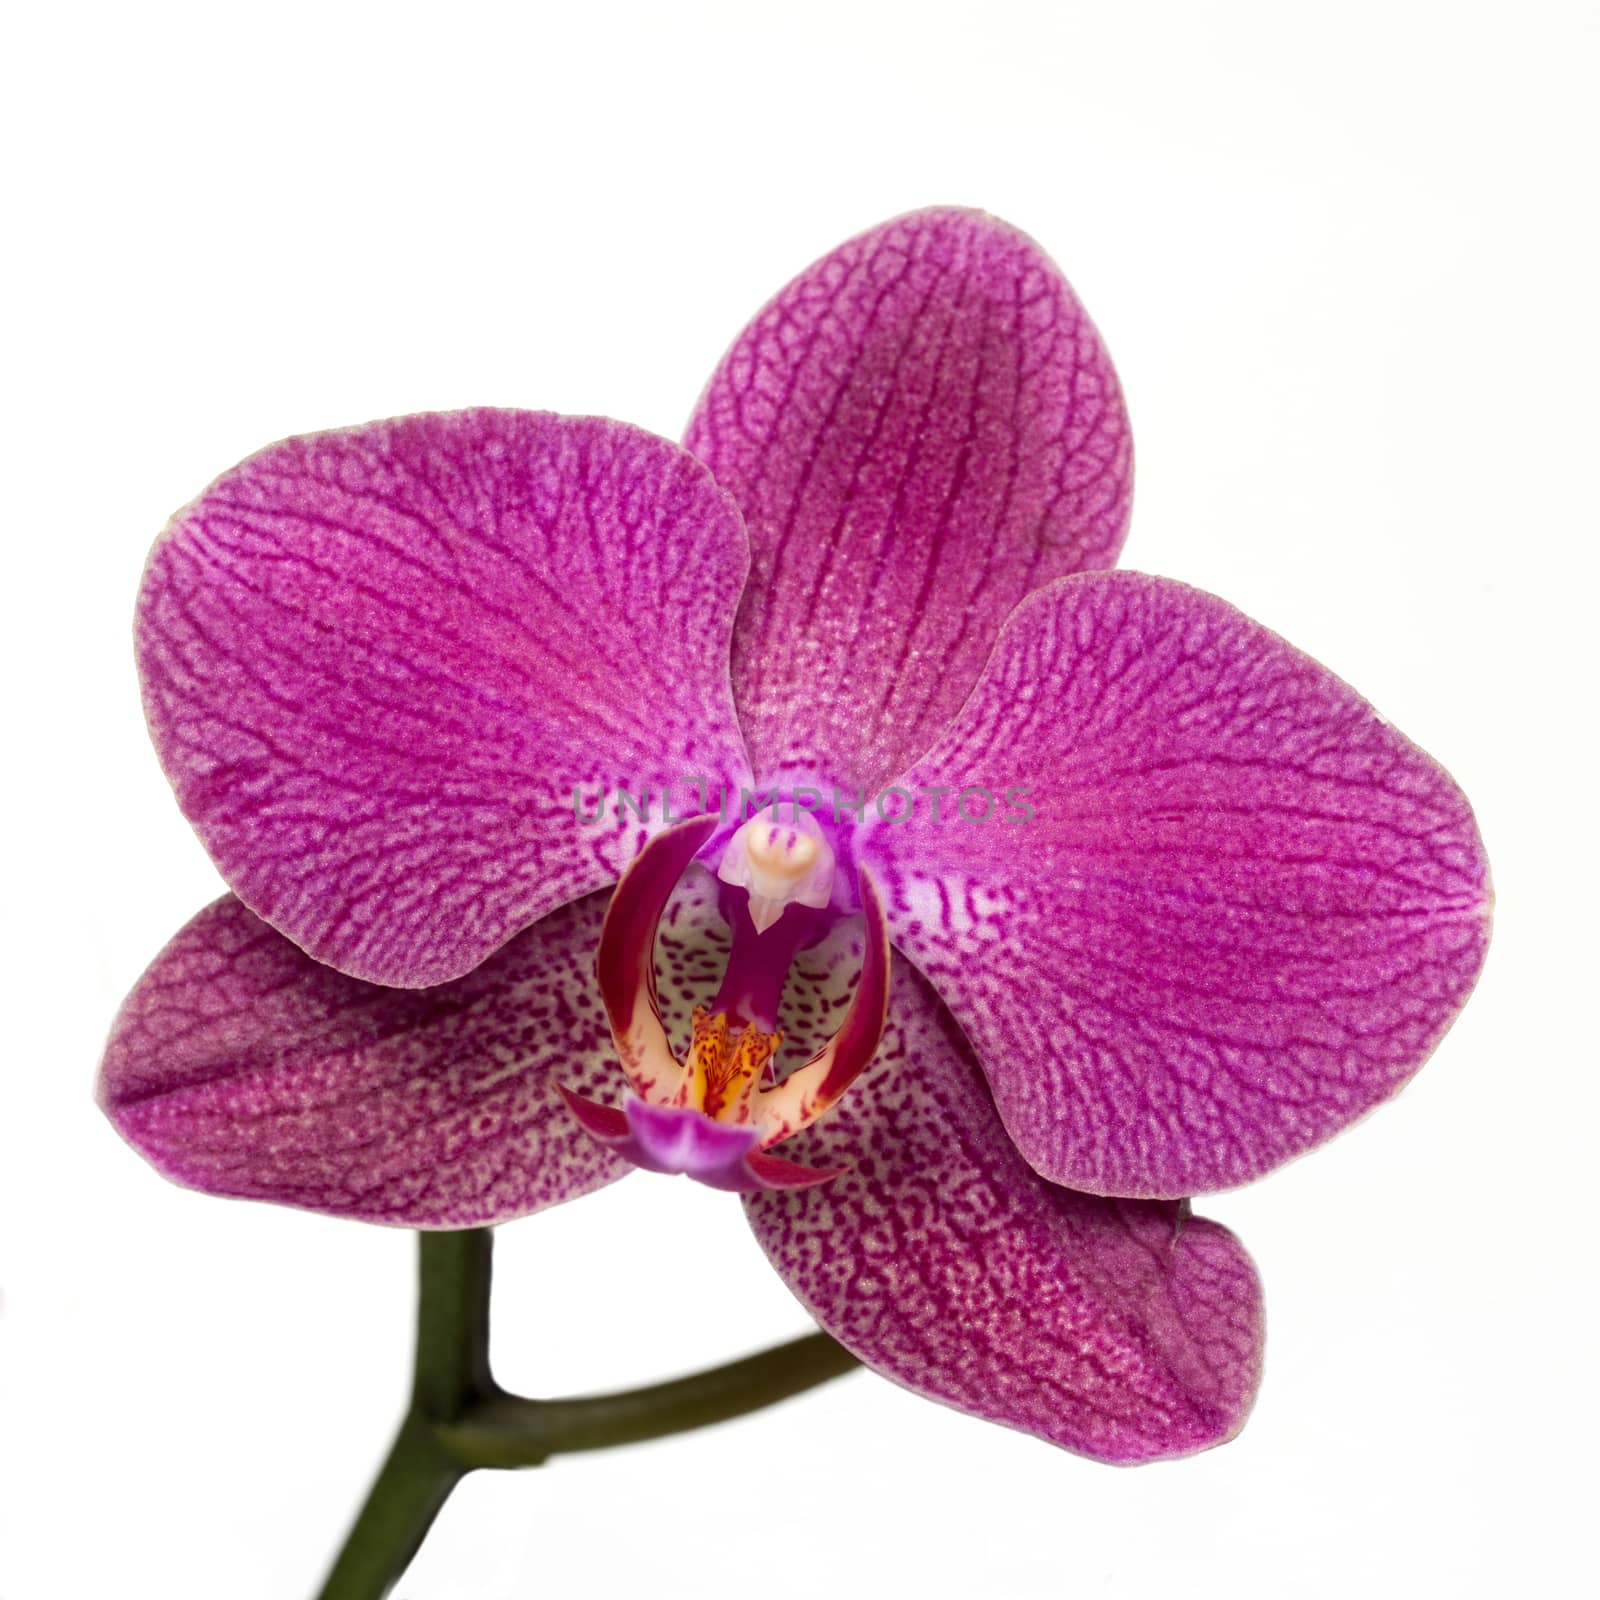 Pink streaked orchid flower on white background by Digoarpi